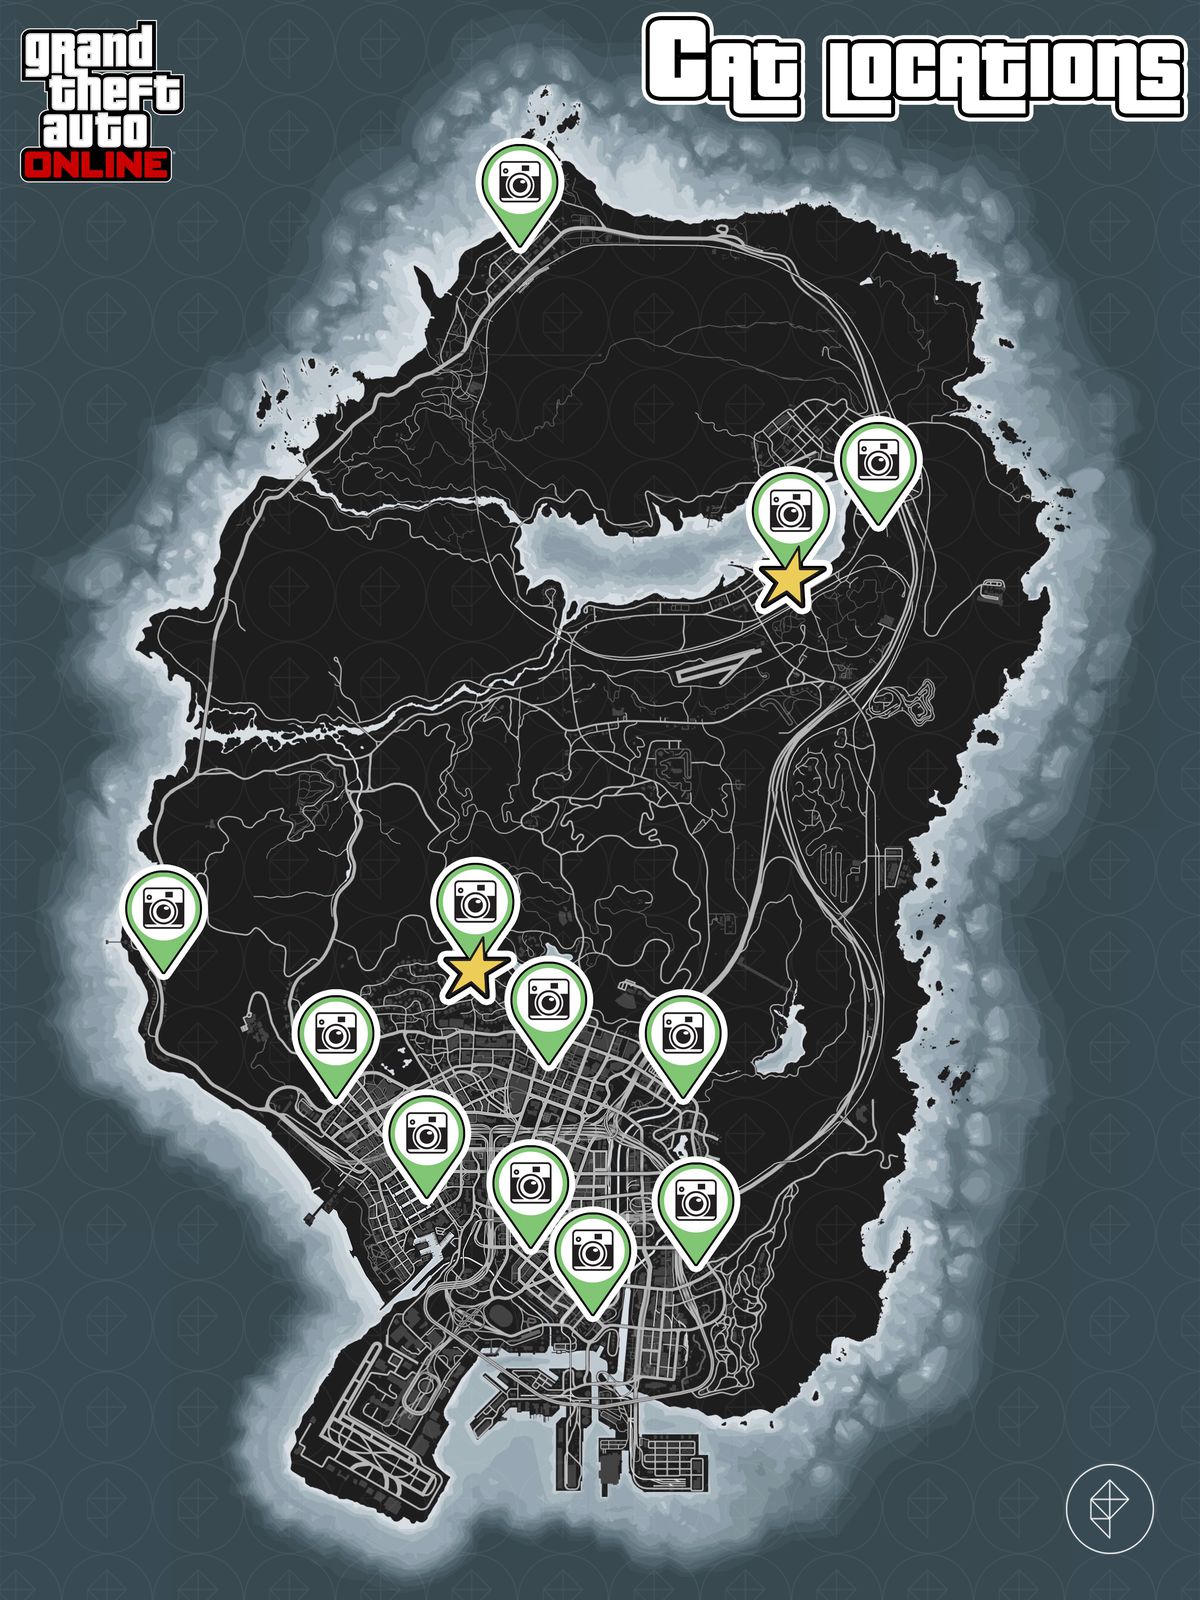 GTA Online map showing cat locations